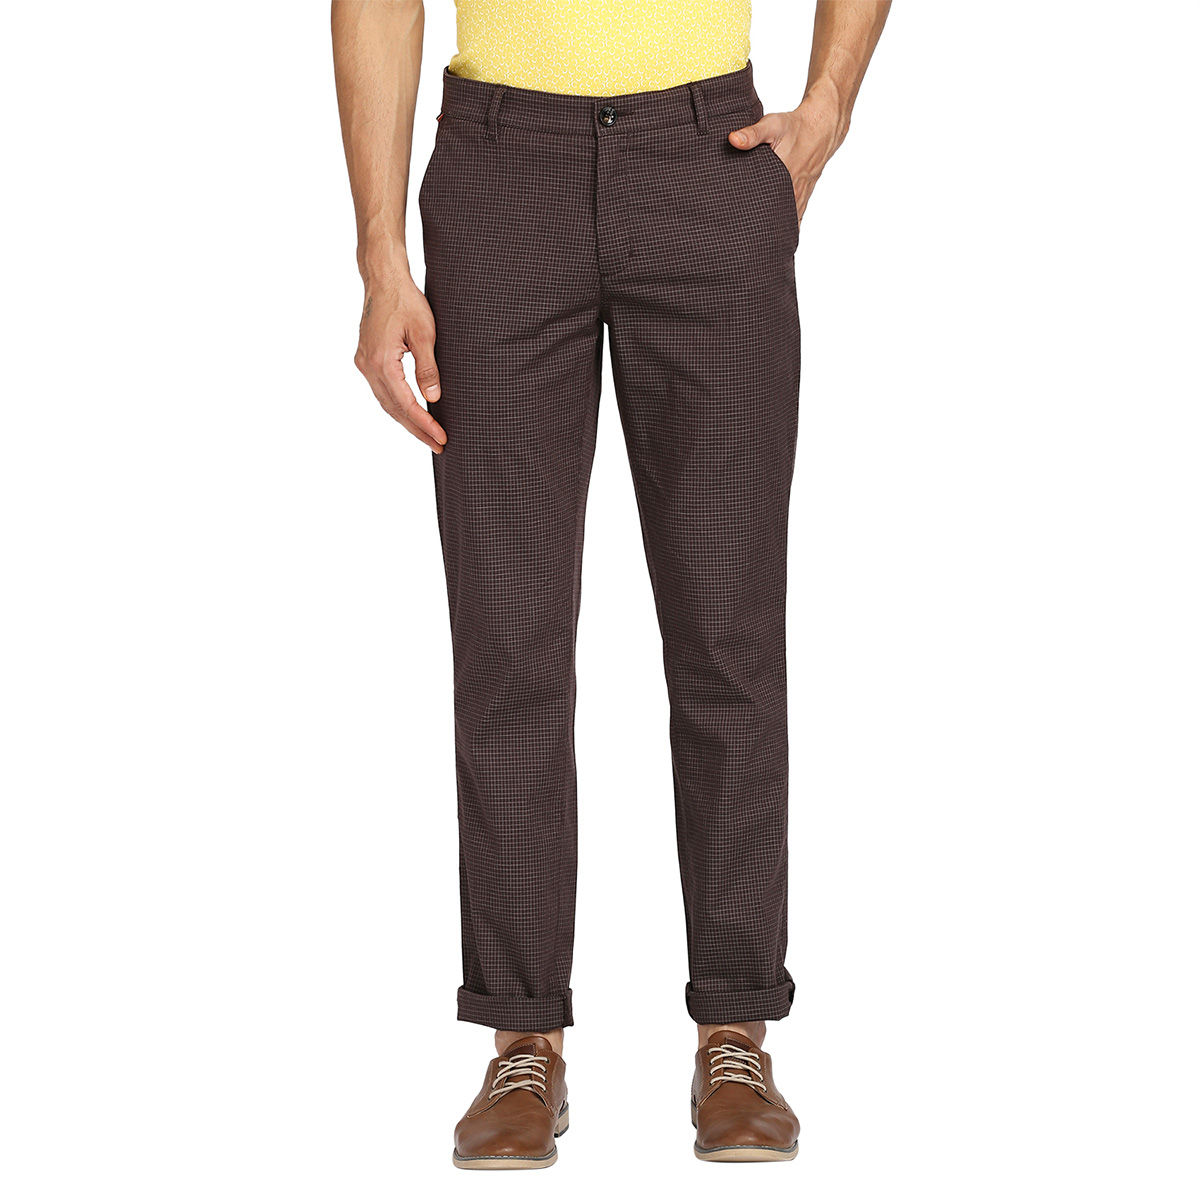 Buy ColorPlus Chinos online  29 products  FASHIOLAin